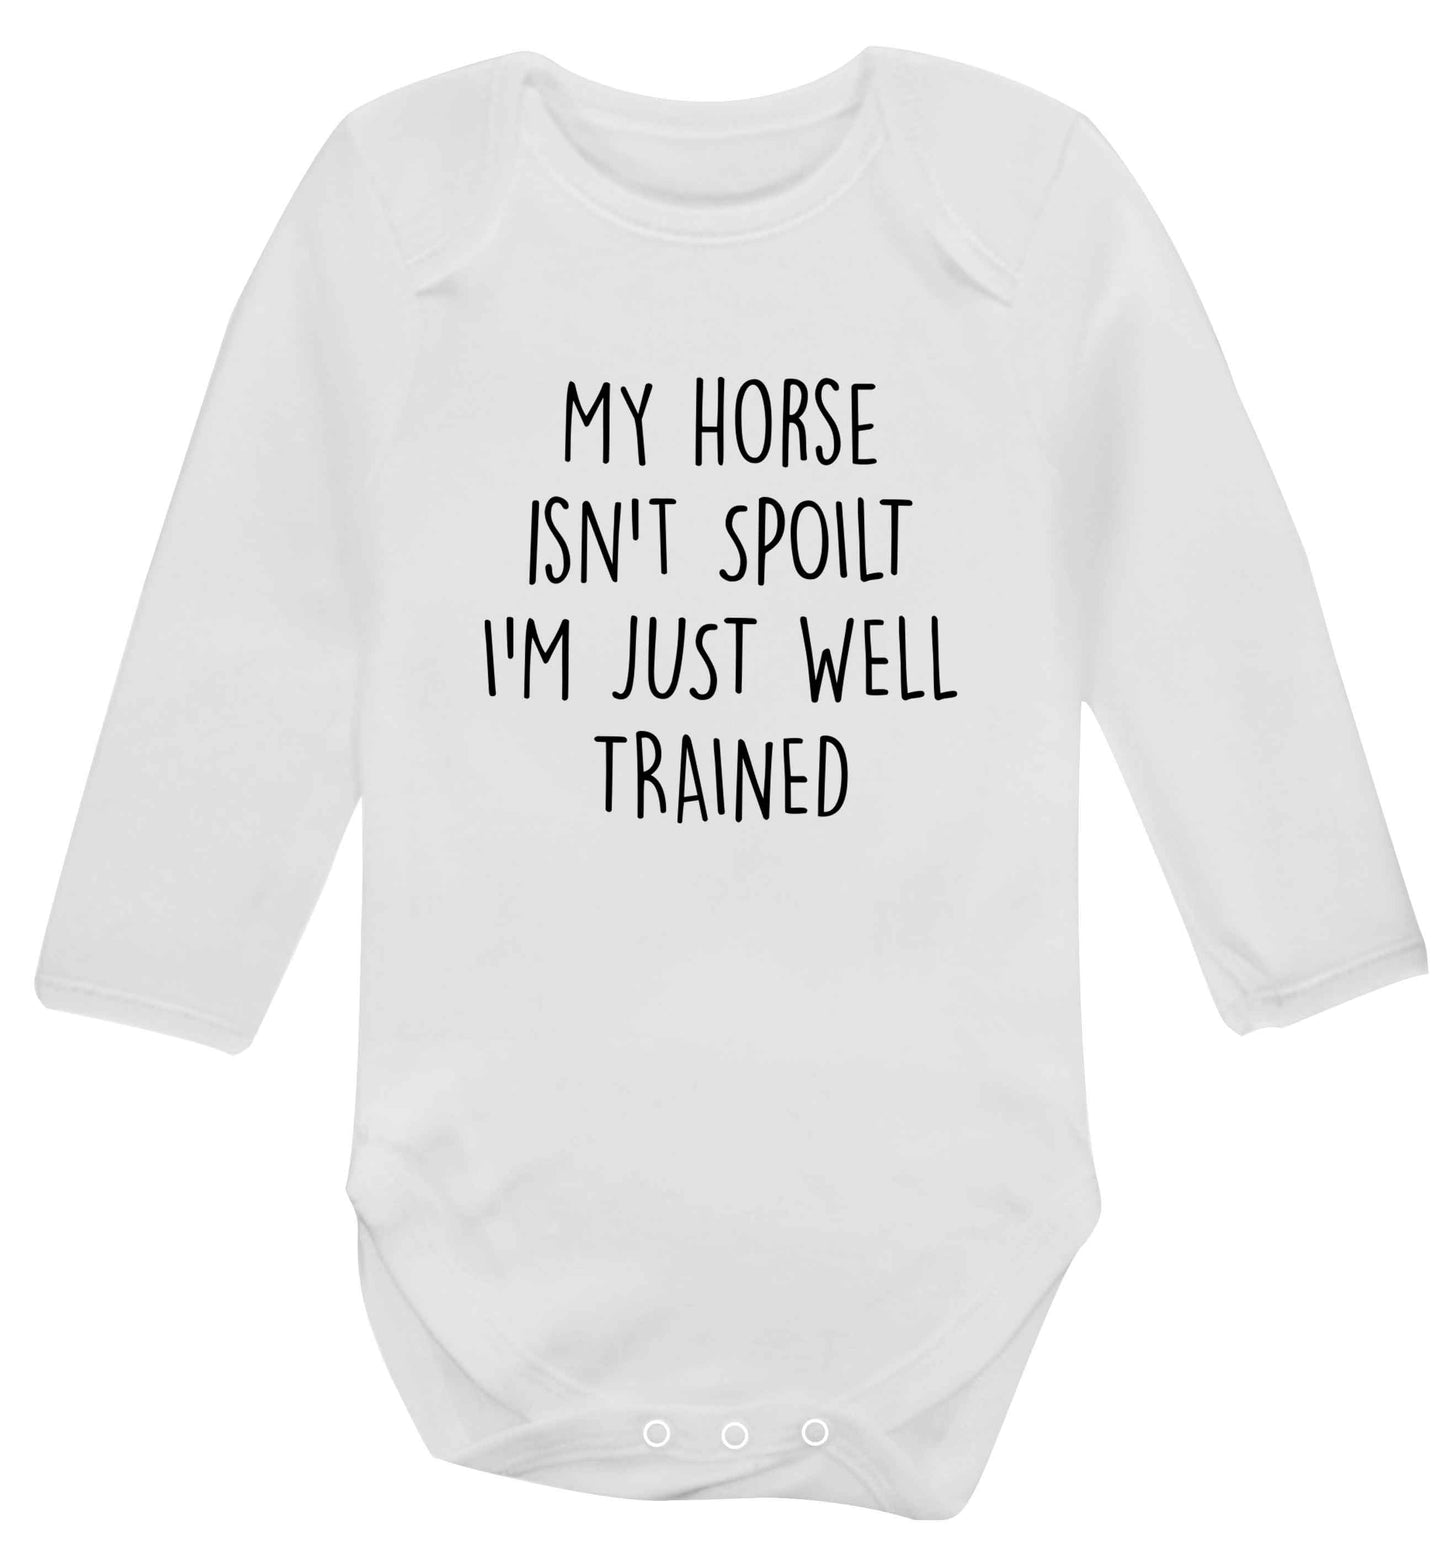 My horse isn't spoilt I'm just well trained baby vest long sleeved white 6-12 months